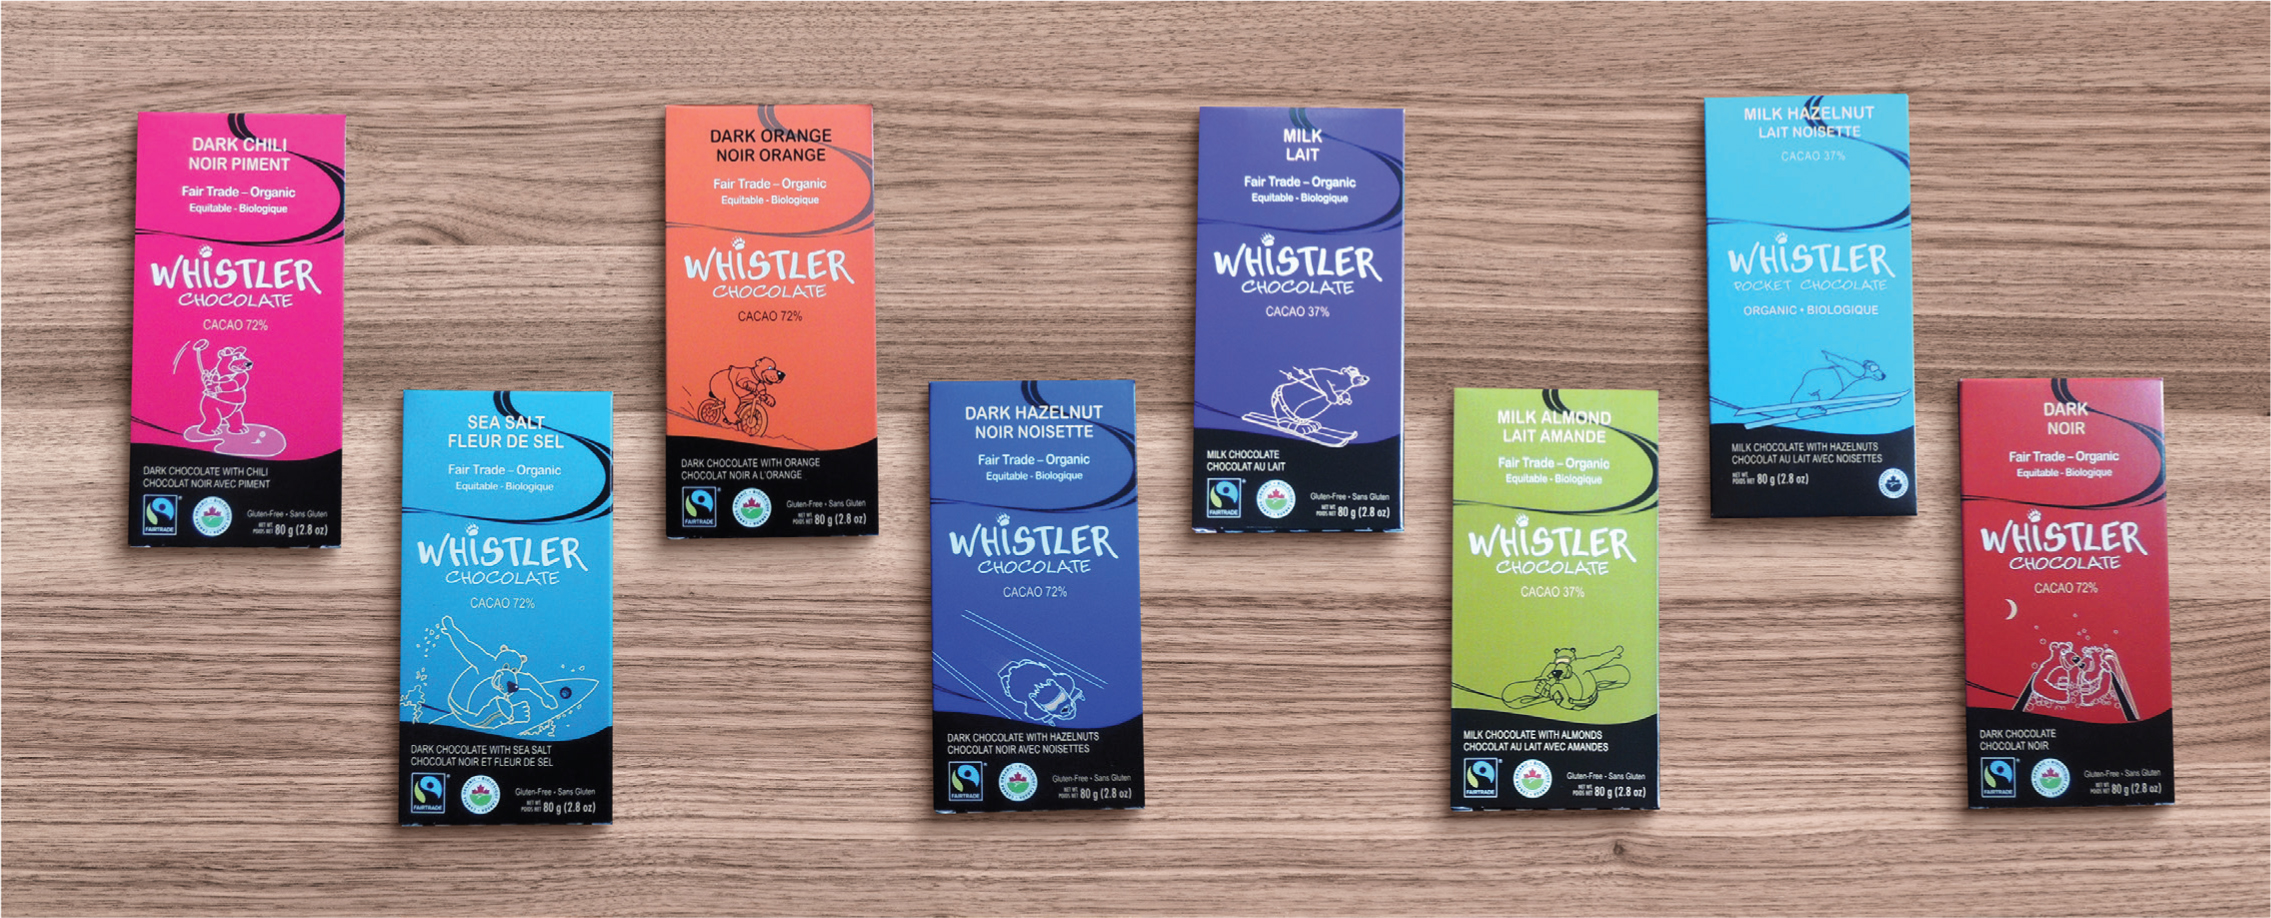 Whistler Chocolate images